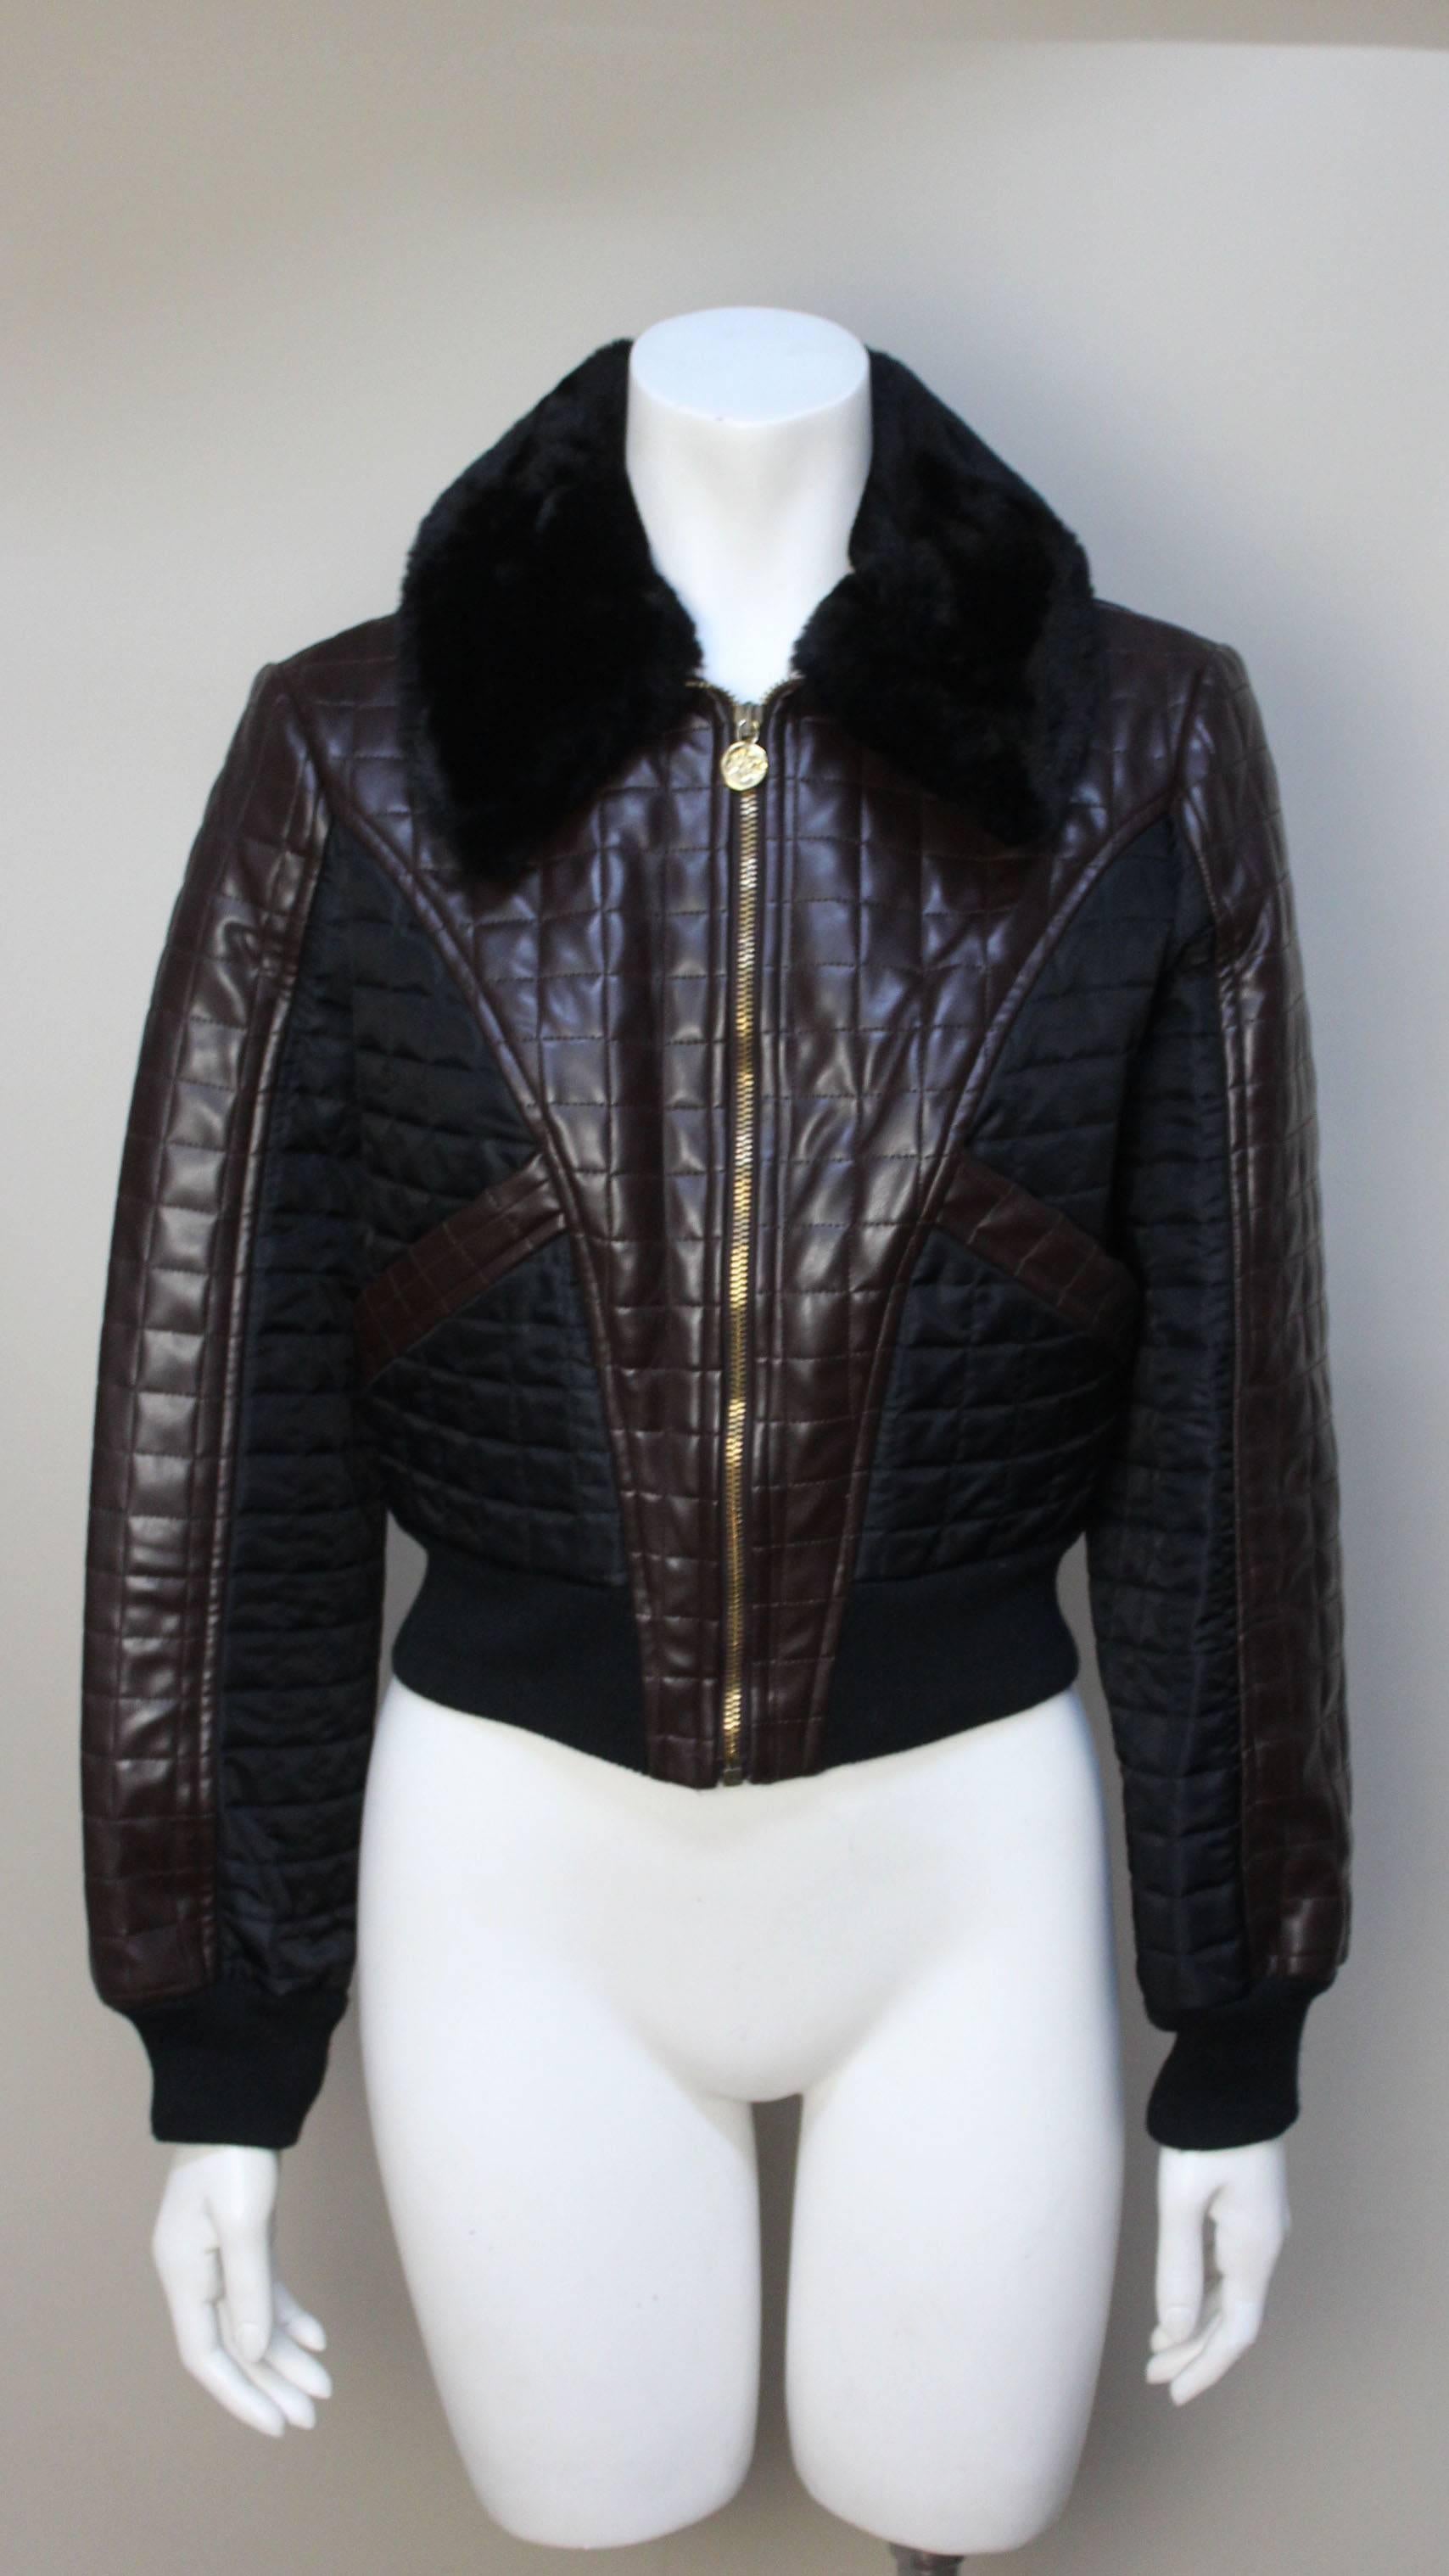 Cropped bomber jackets were all the rage in 1990's fashion and their time has returned. This quilted vinyl style is very on point. It has great details. The body is in a rich brown vinyl with black nylon quilted inserts above the slash pockets. The